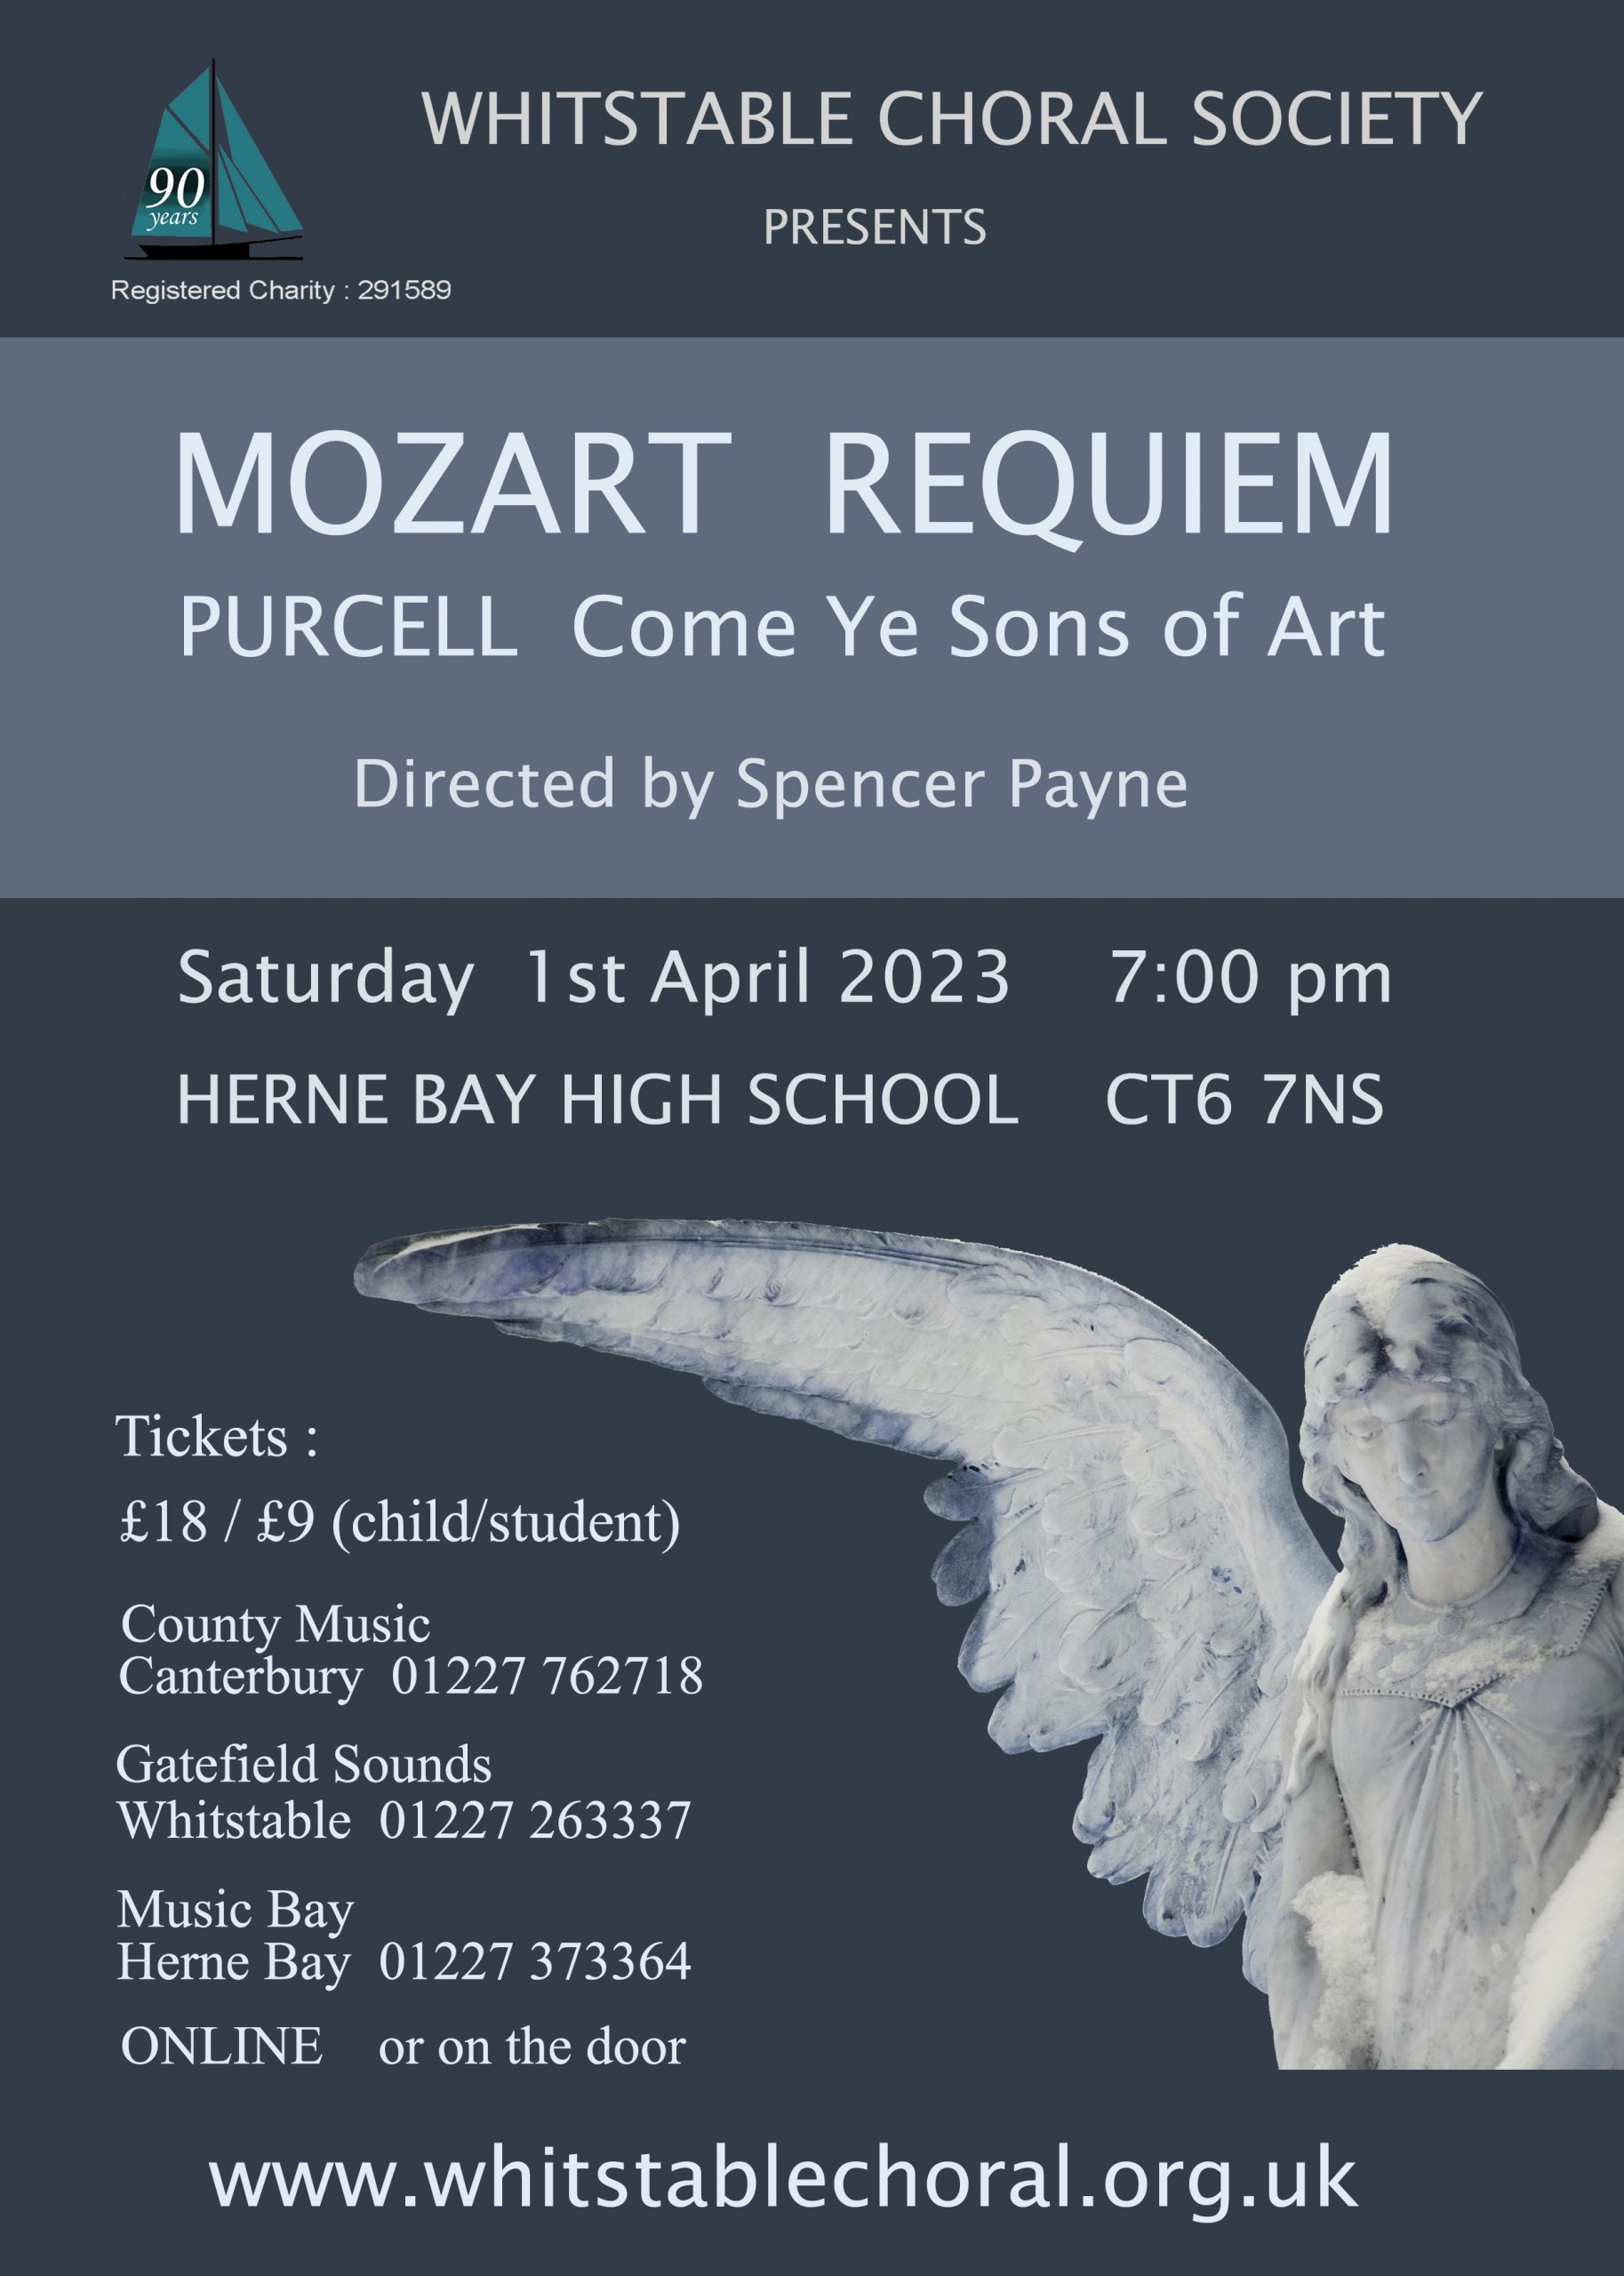 Mozart Requiem Purcell Come Ye Sons of Art